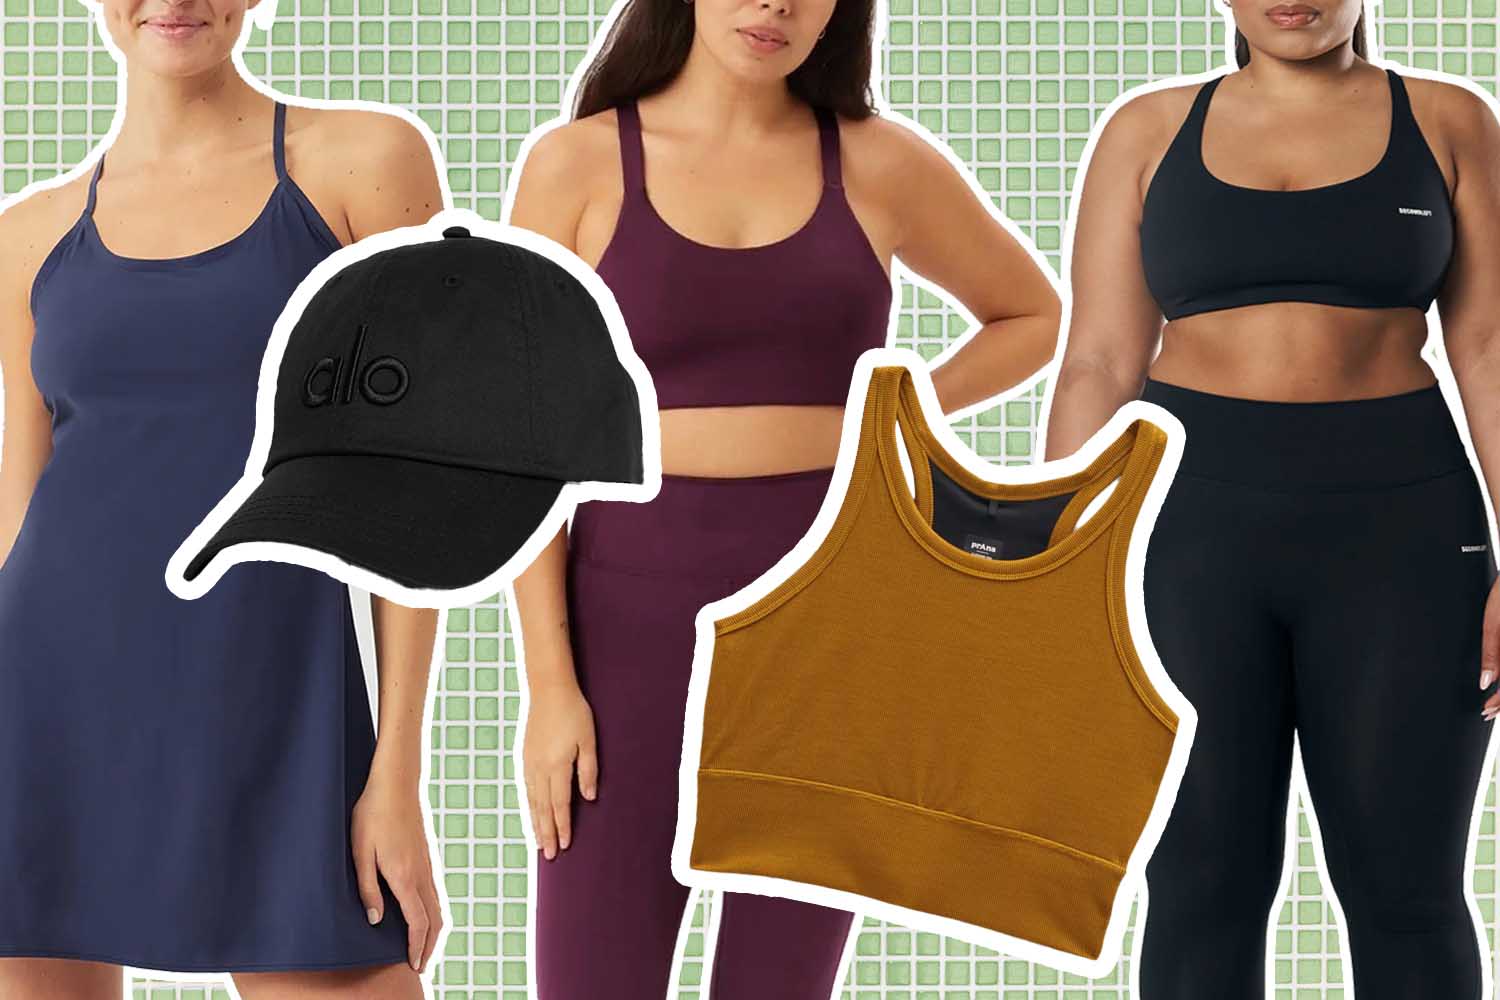 A sampling of the best women's activewear brands, including Wolven, Wilson and Girlfriend Collective.